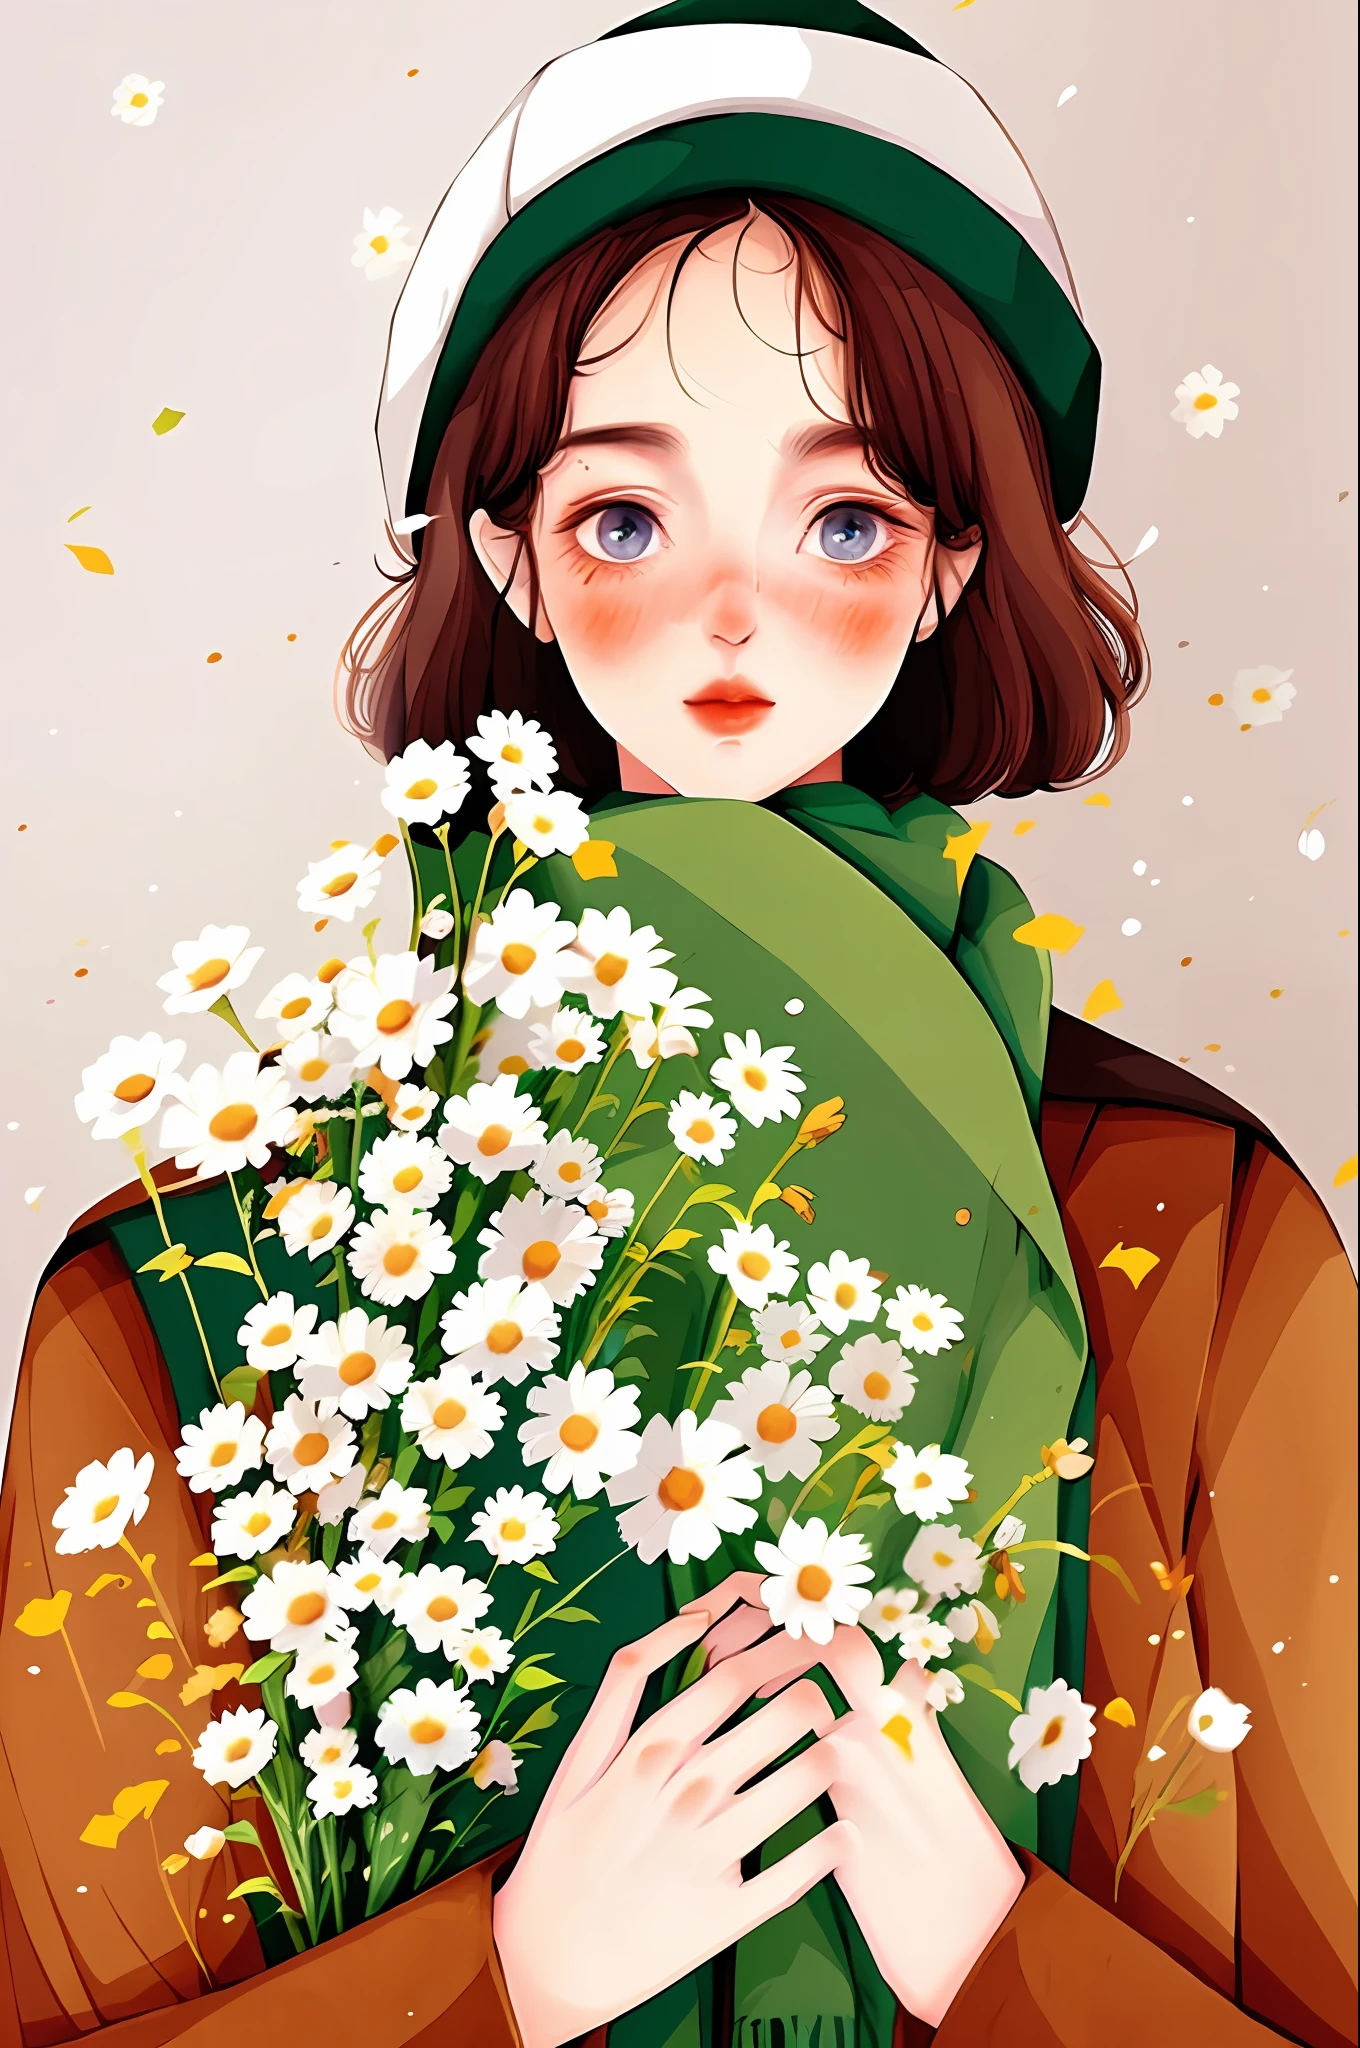 yxycolor,1girl in, Solo, flower, Green Scarf, scarf, Brown hair, White cap, hat, white blossoms, blush, Blue eyes, Looking at Viewer, Upper body, Long sleeves, Holding, Short hair, coat, Jacket, Simple background, holding flowers